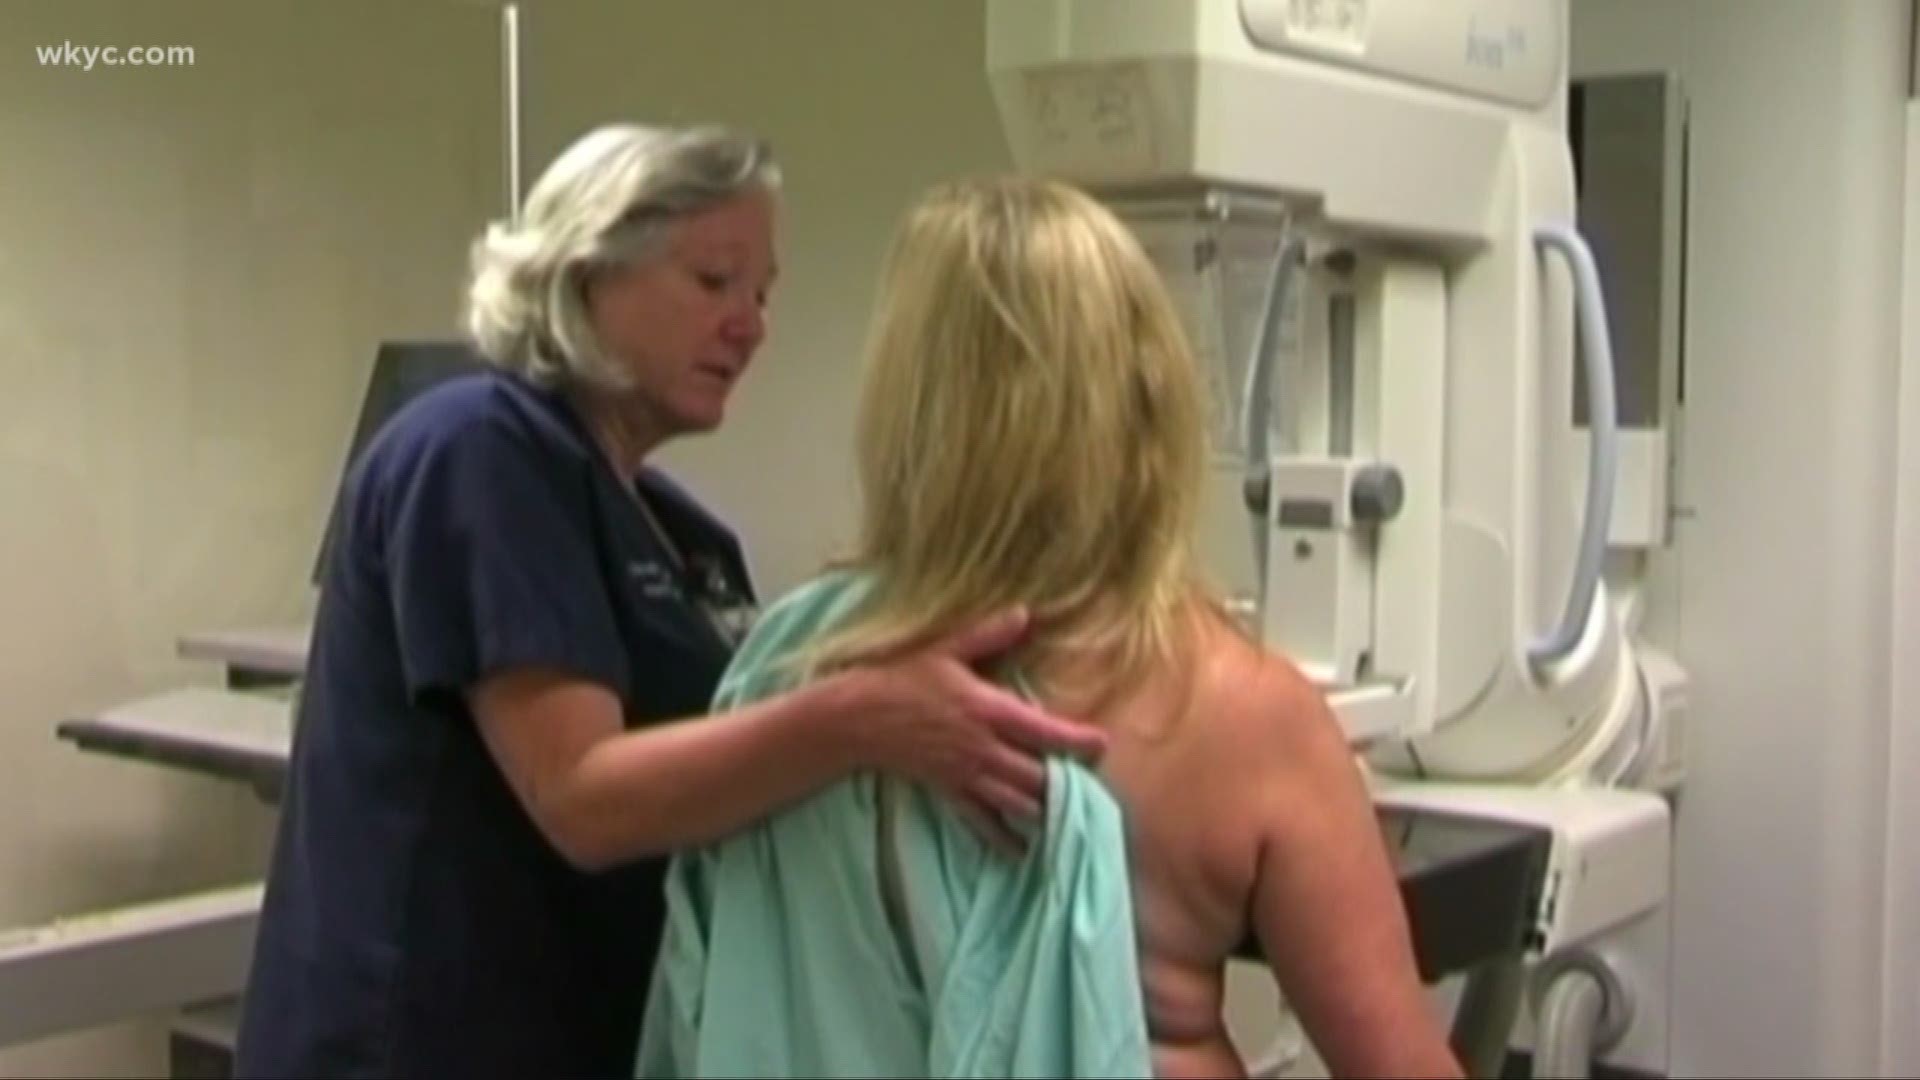 While breast cancer vaccine research continues in Cleveland, trials underway in Florida